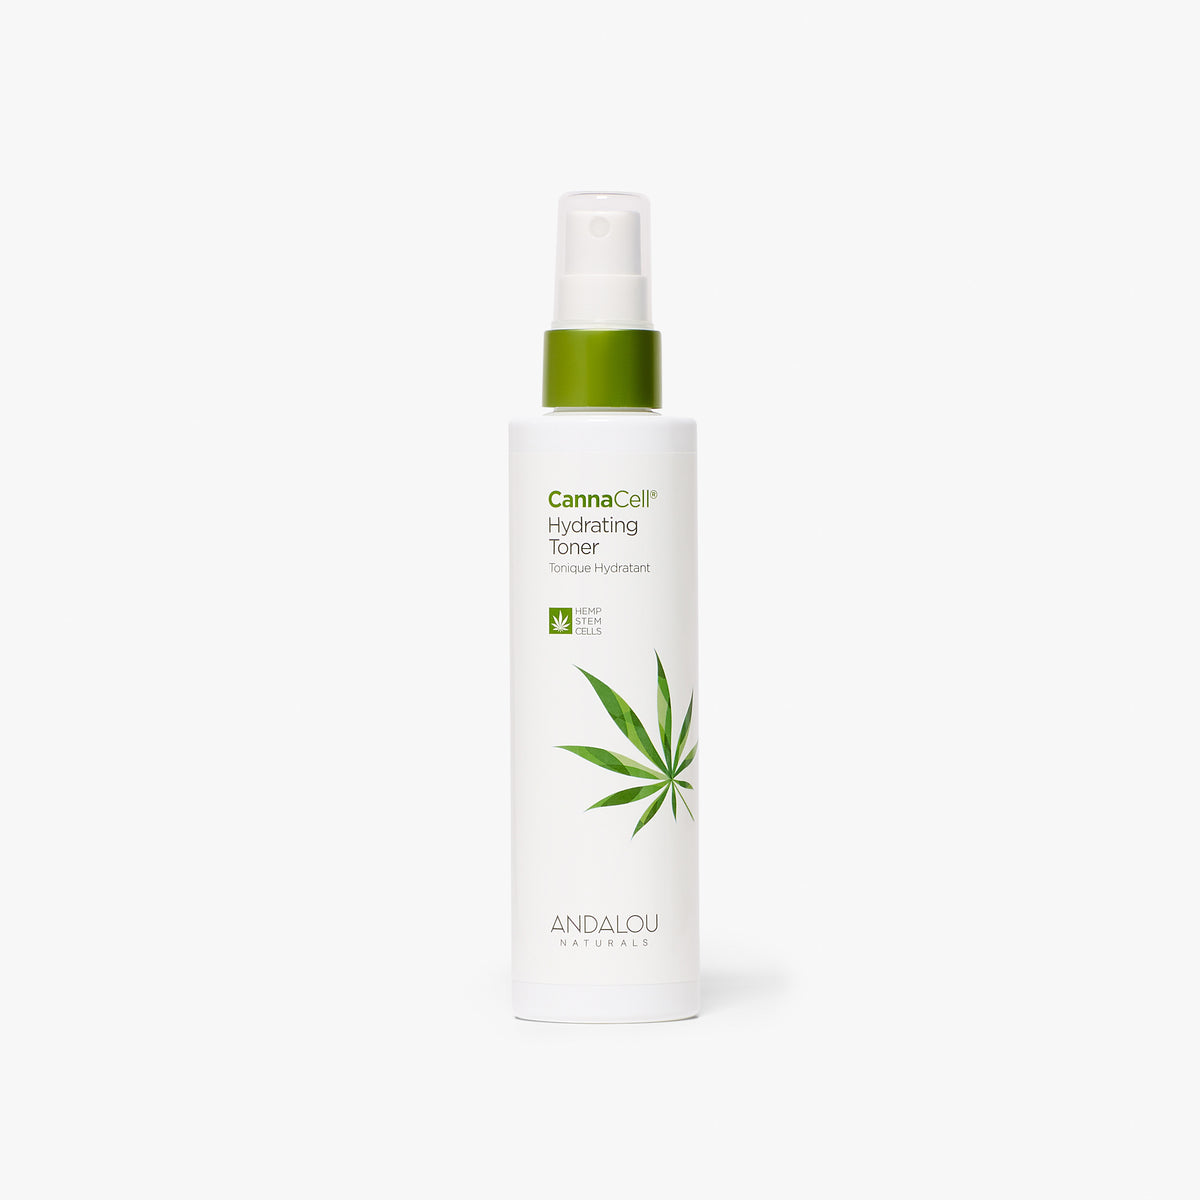 Spray bottle of CannaCell Hydrating Toner by Andalou Naturals on white background.